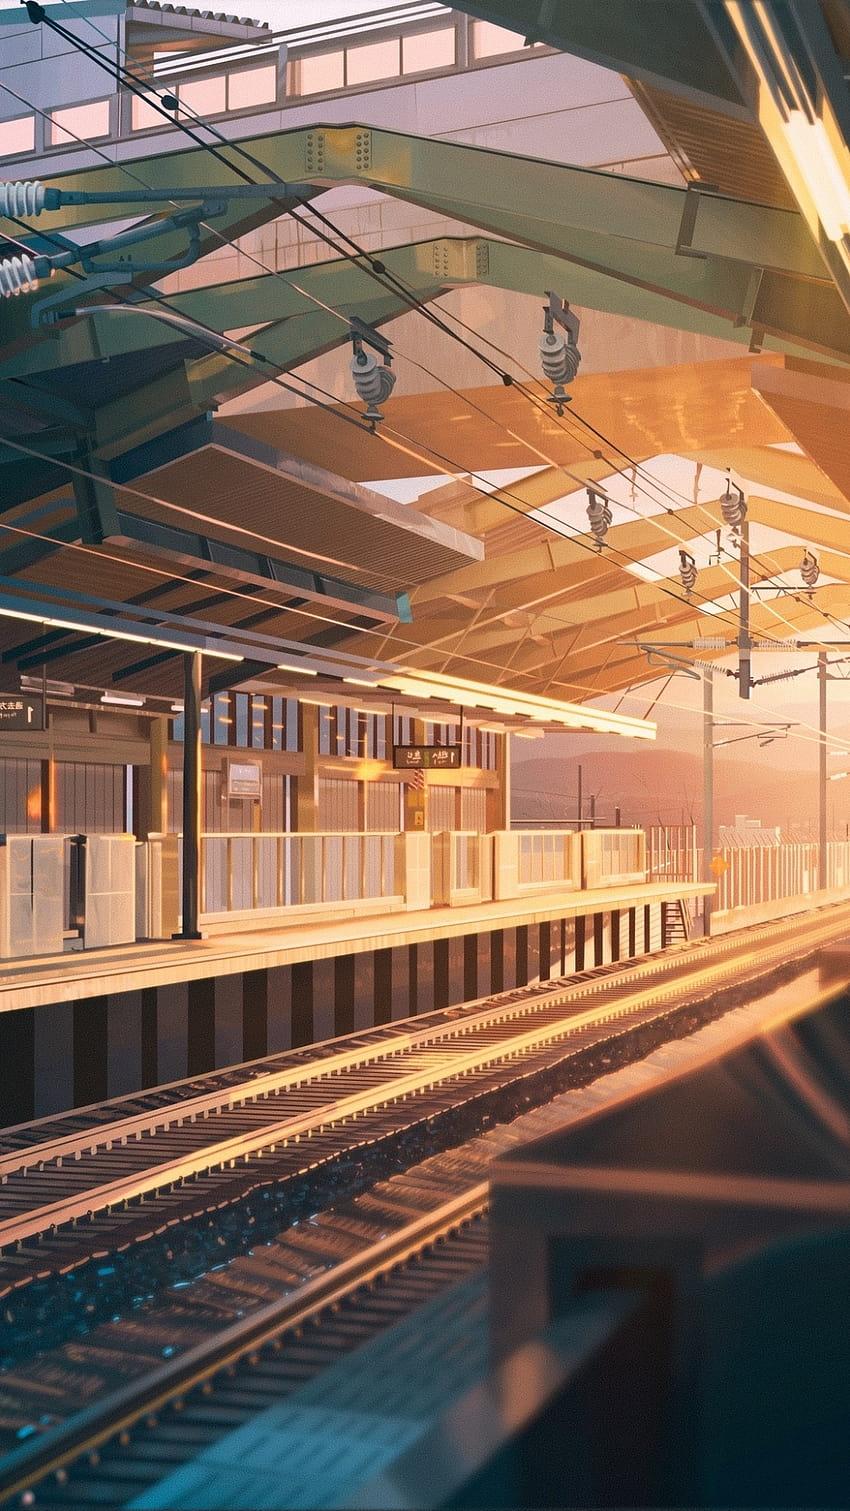 Steam Workshop::Anime Girl & Boy on Train while sunset (60 fps) (1920x1080)